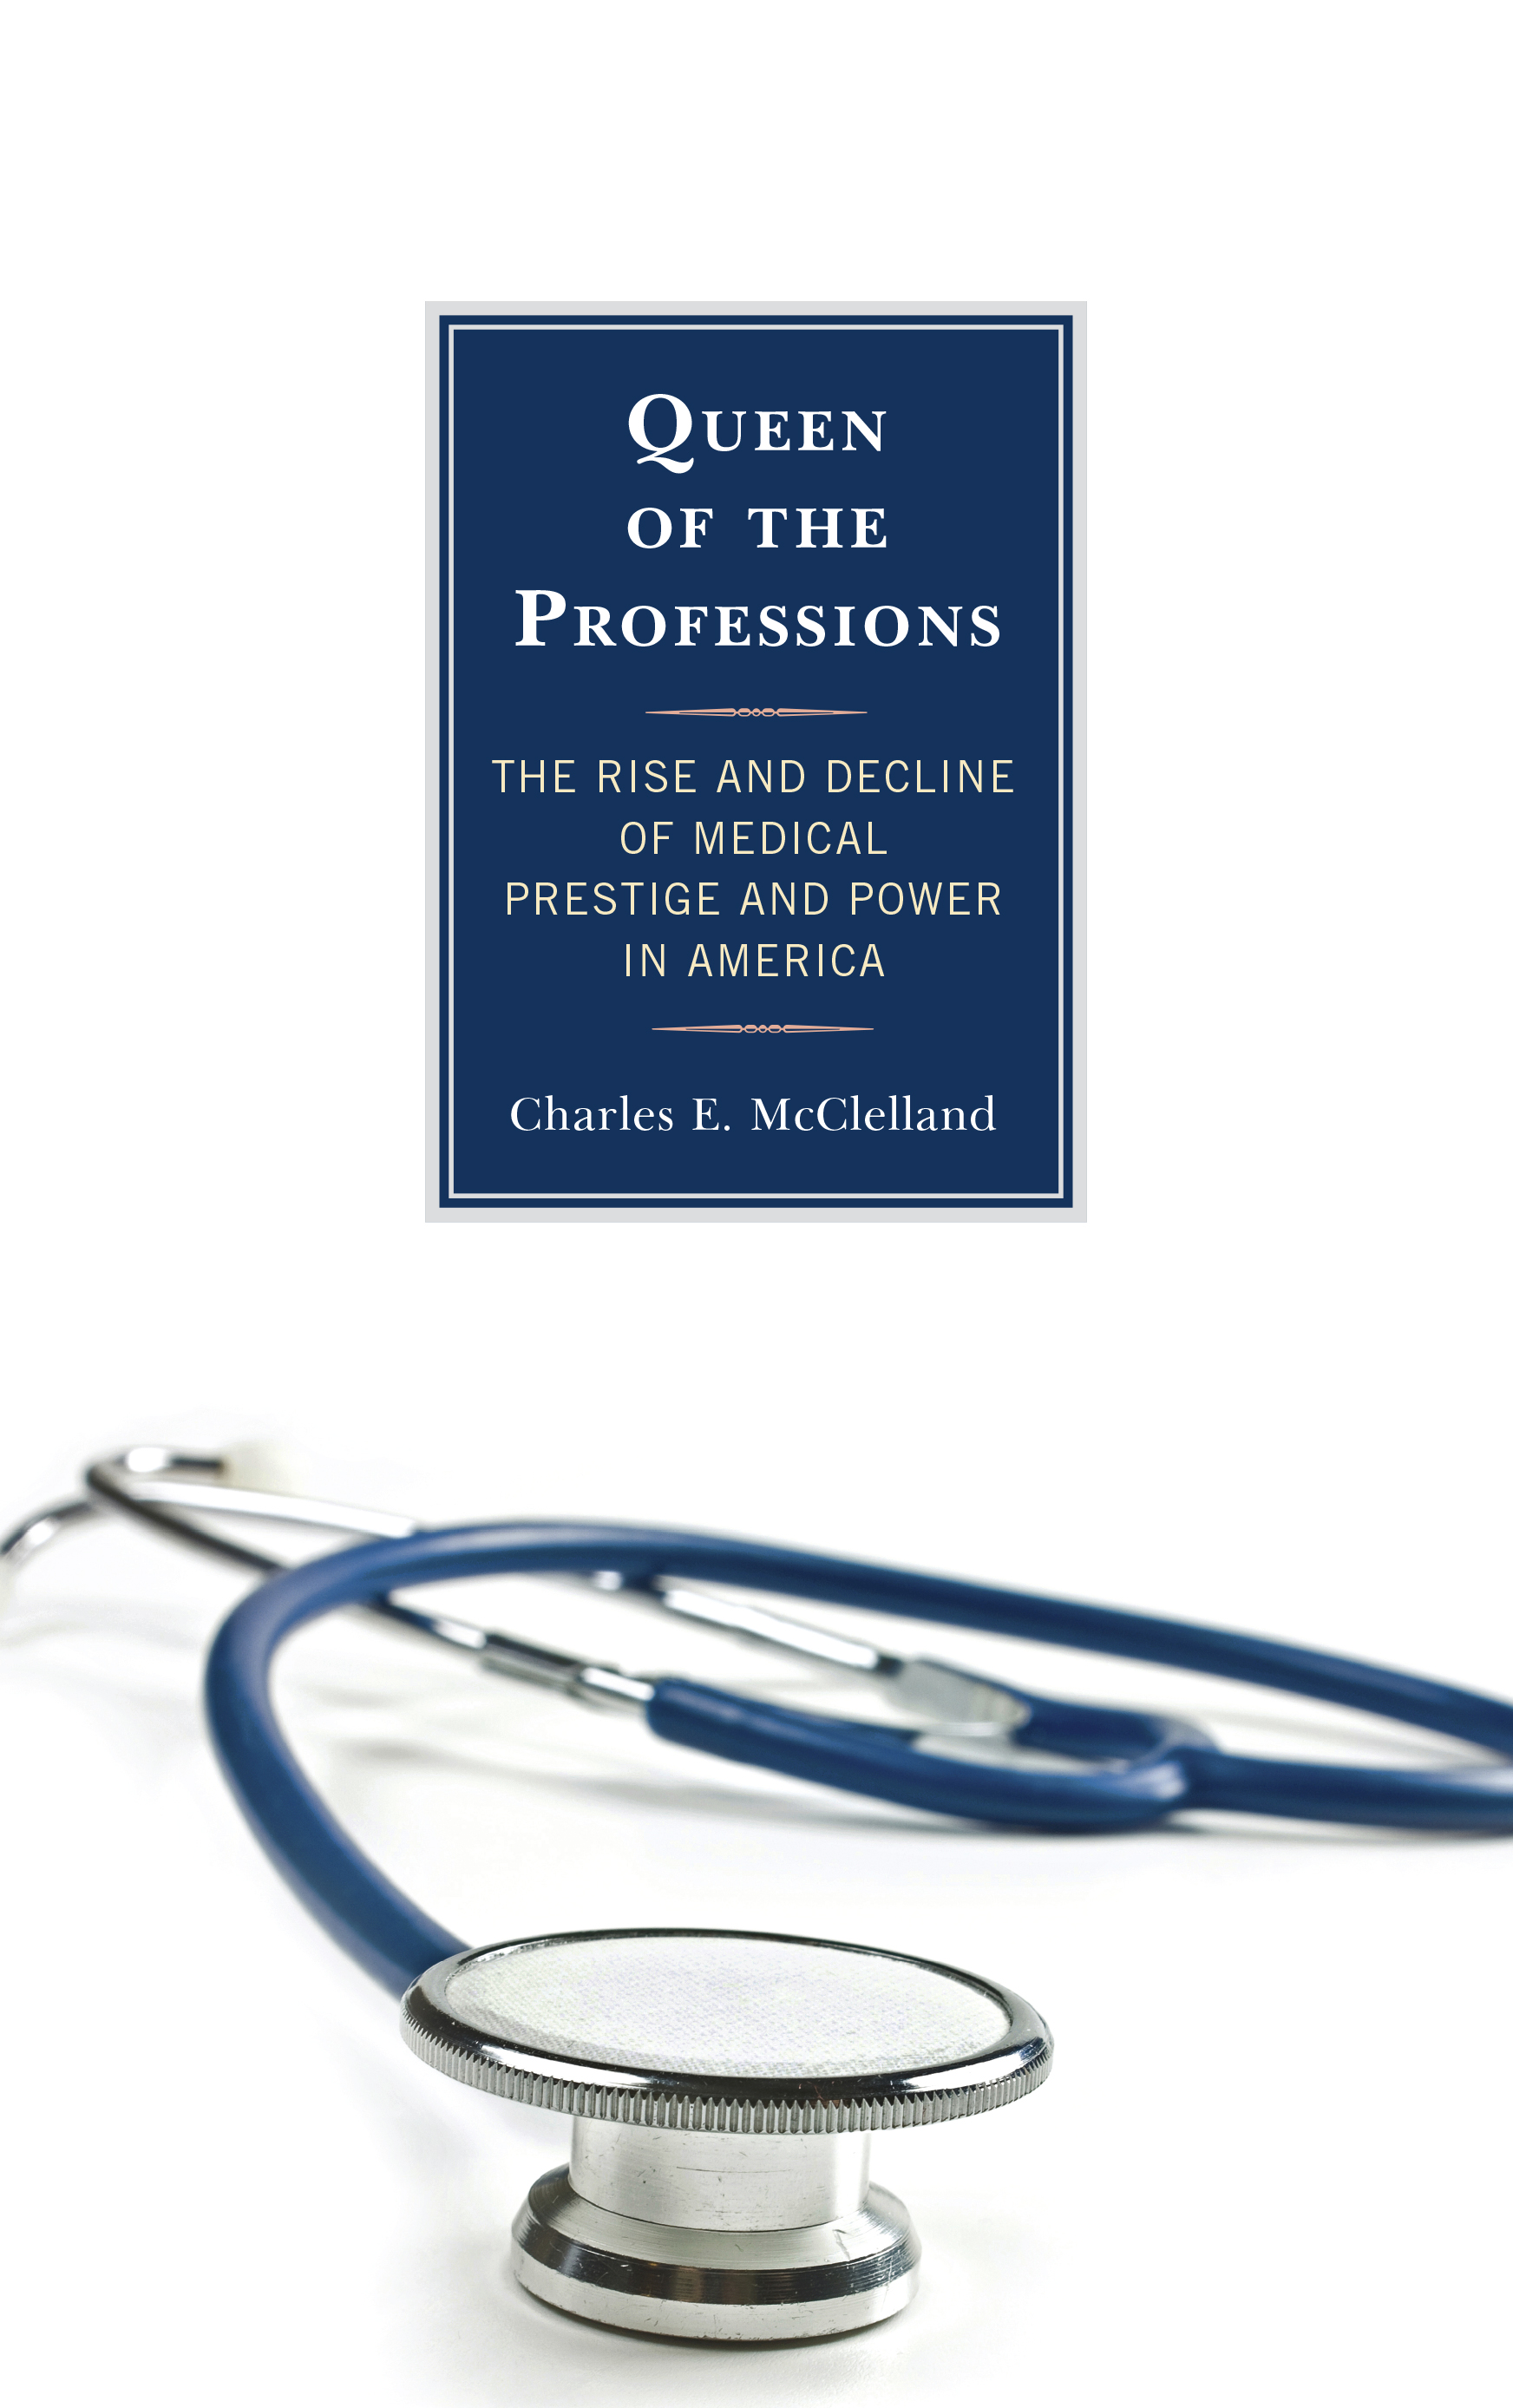 Queen of the Professions: The Rise and Decline of Medical Prestige and Power in America